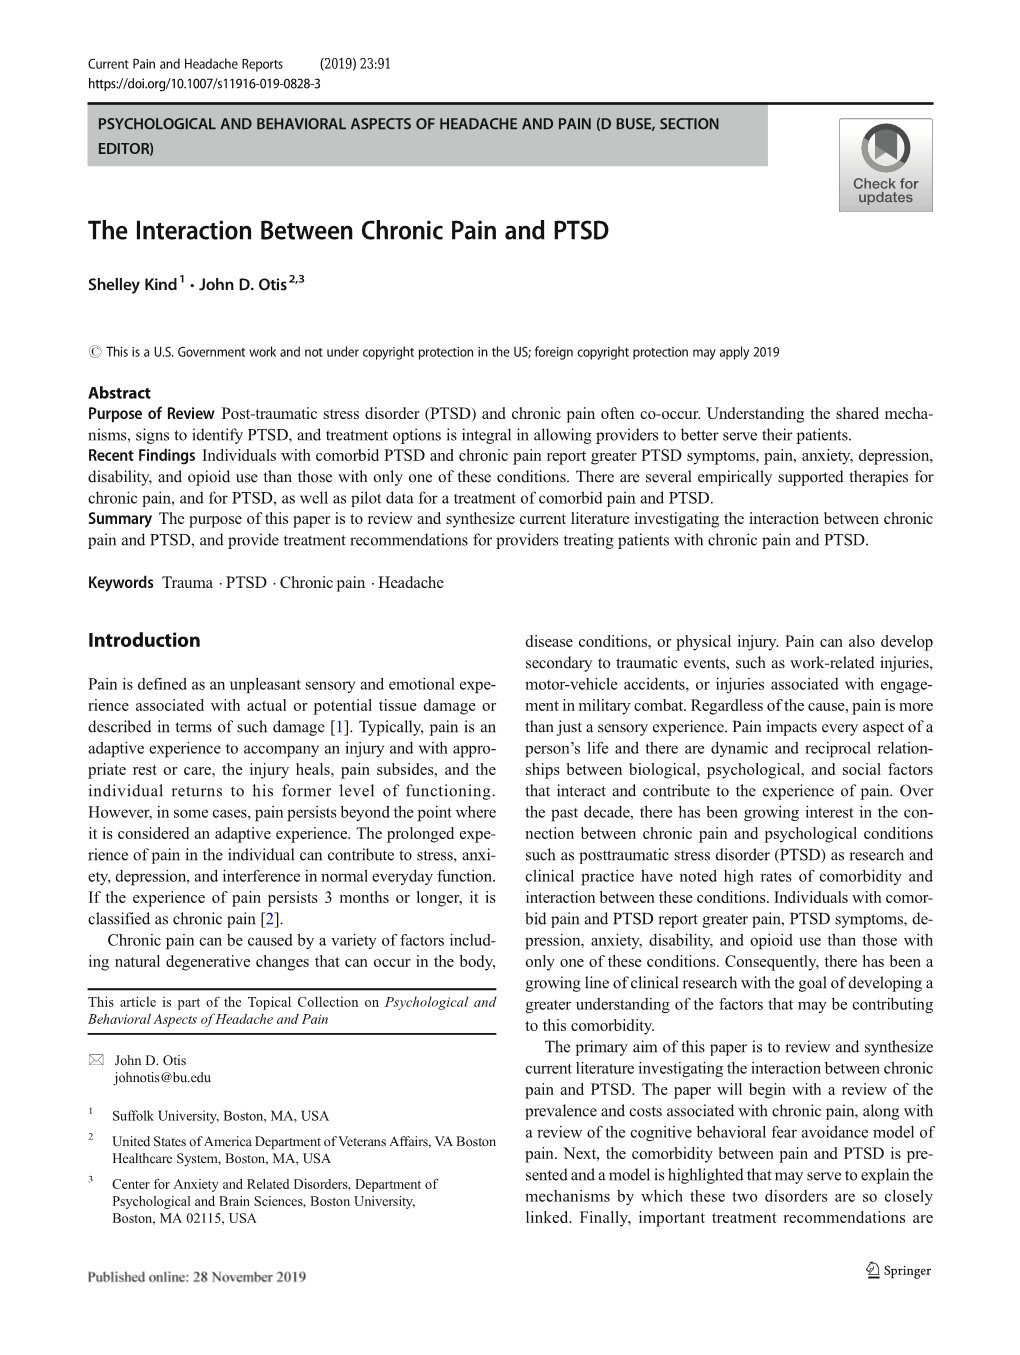 The Interaction Between Chronic Pain and PTSD